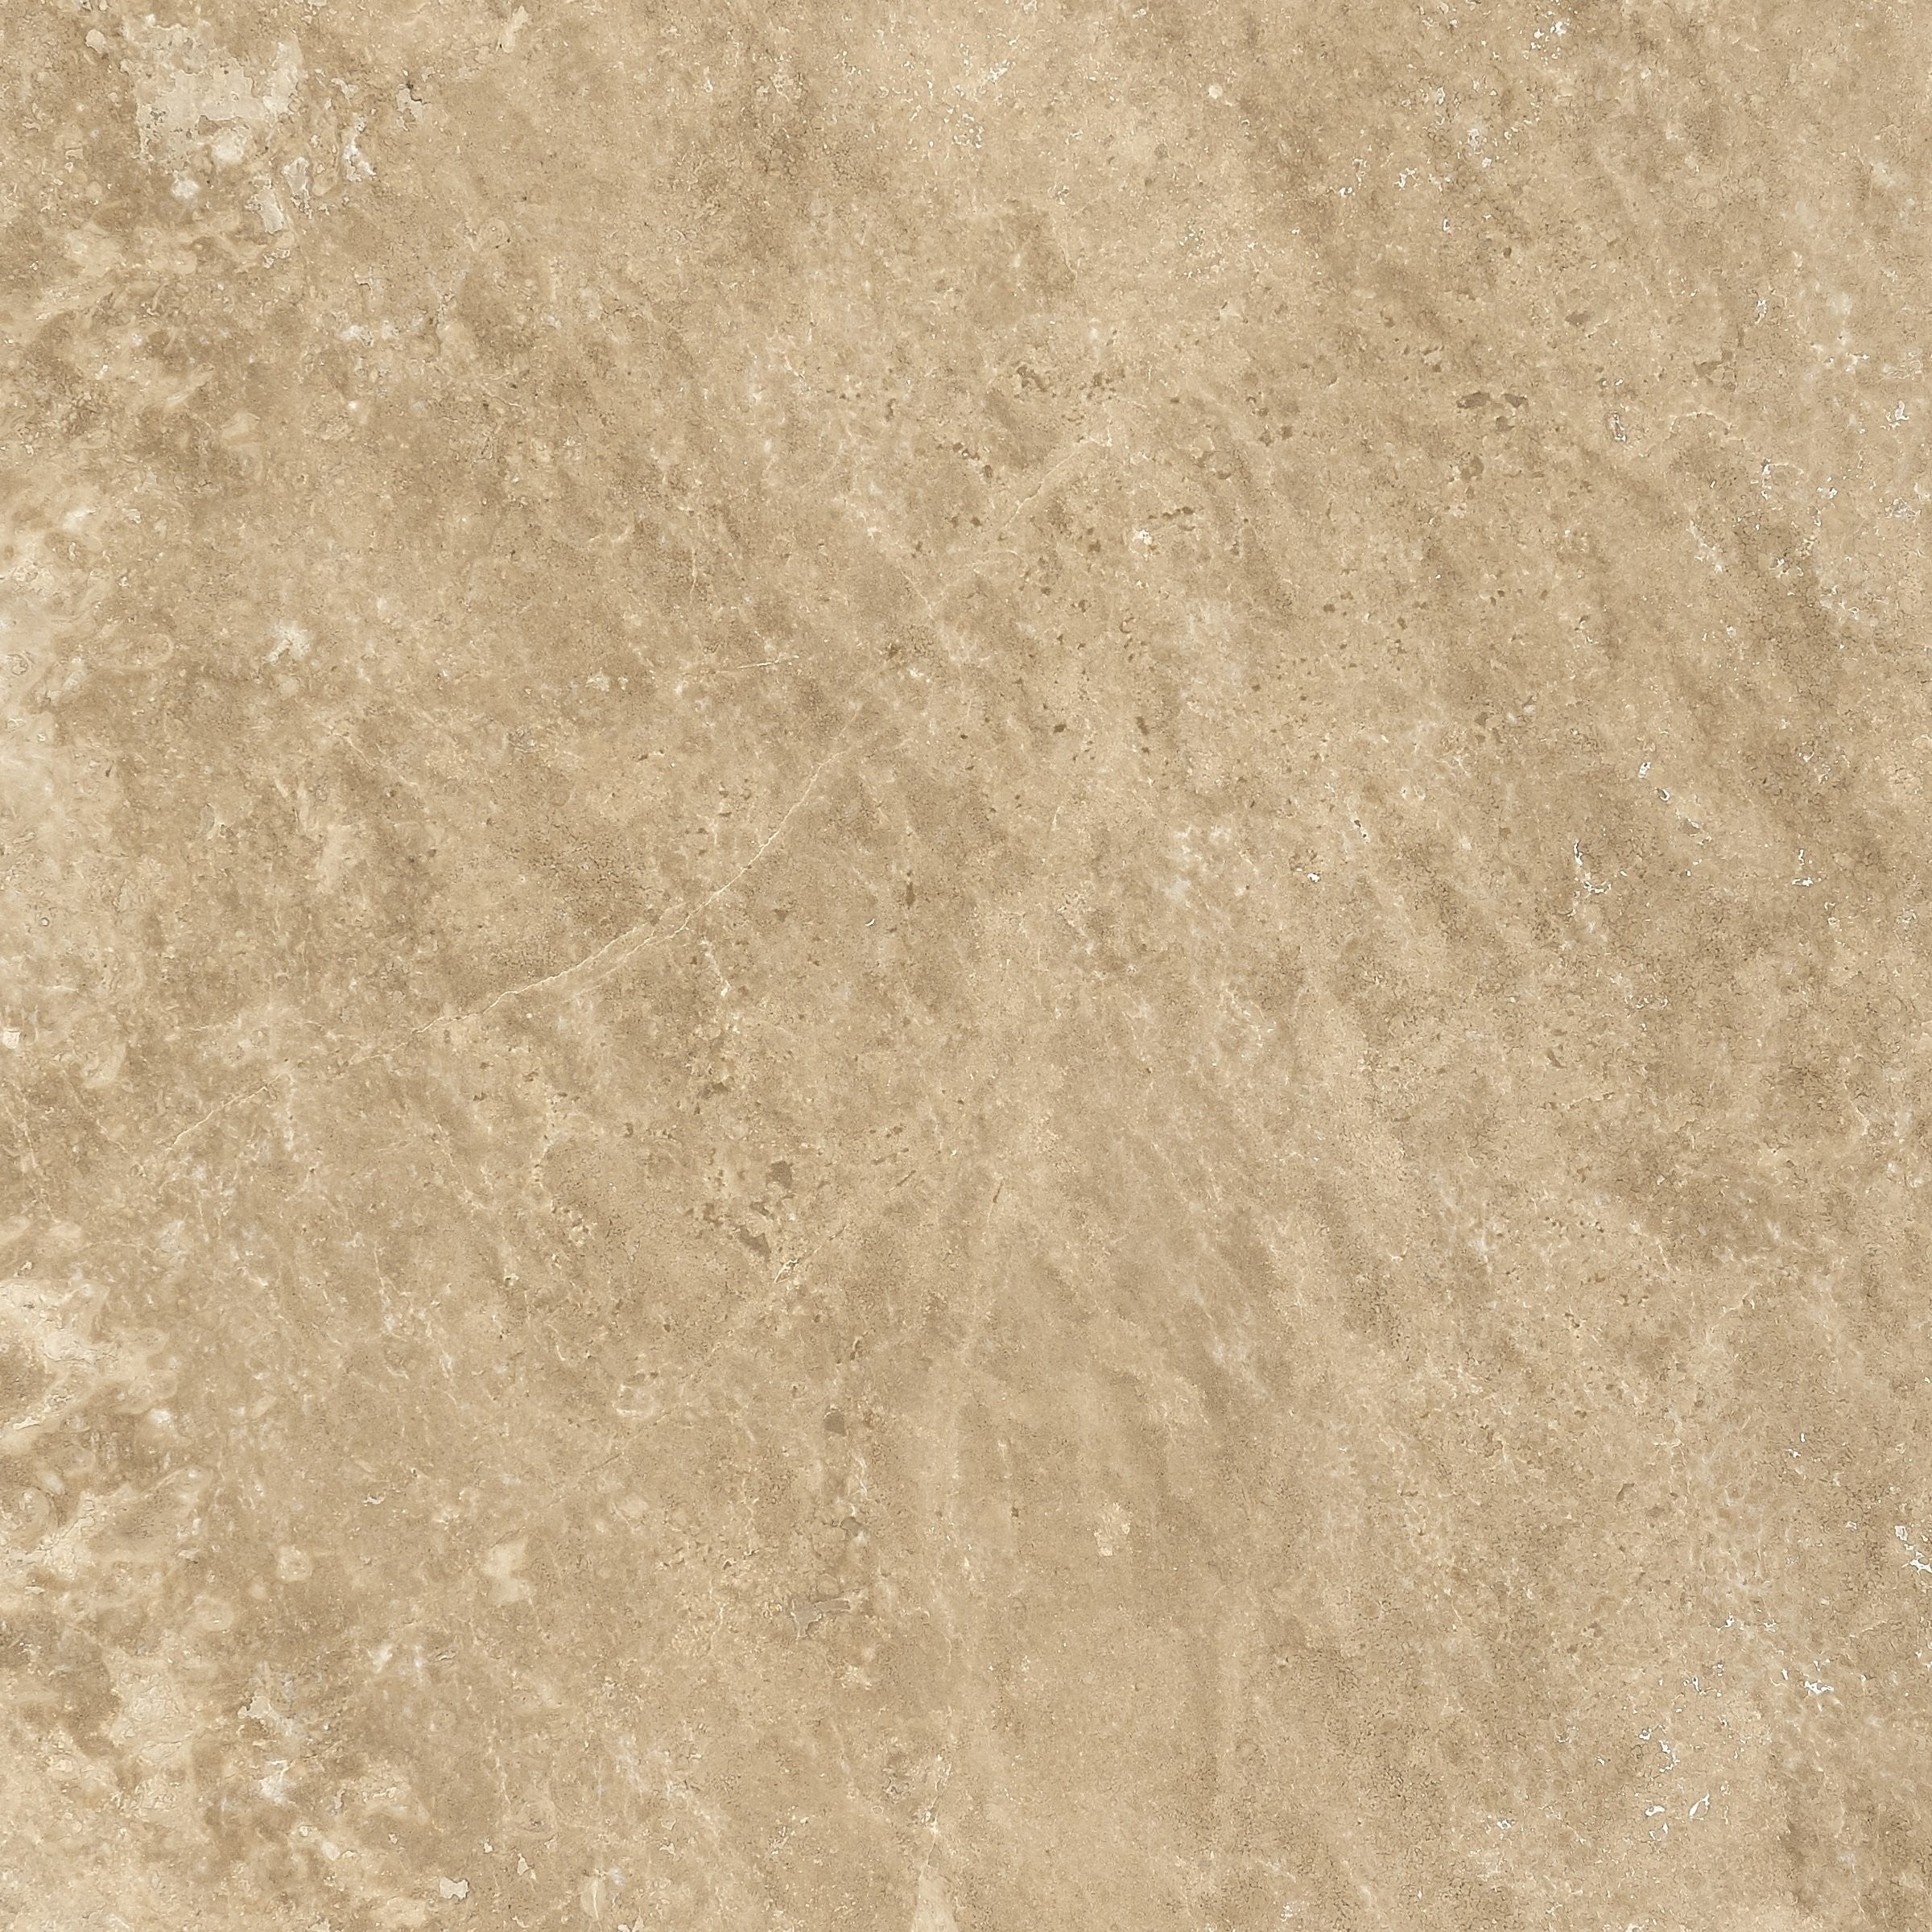 Walnut Travertine Floor and Wall Tiles  - DW TILE & STONE - Atlanta Marble Natural Stone Wholesale Stone Supplier